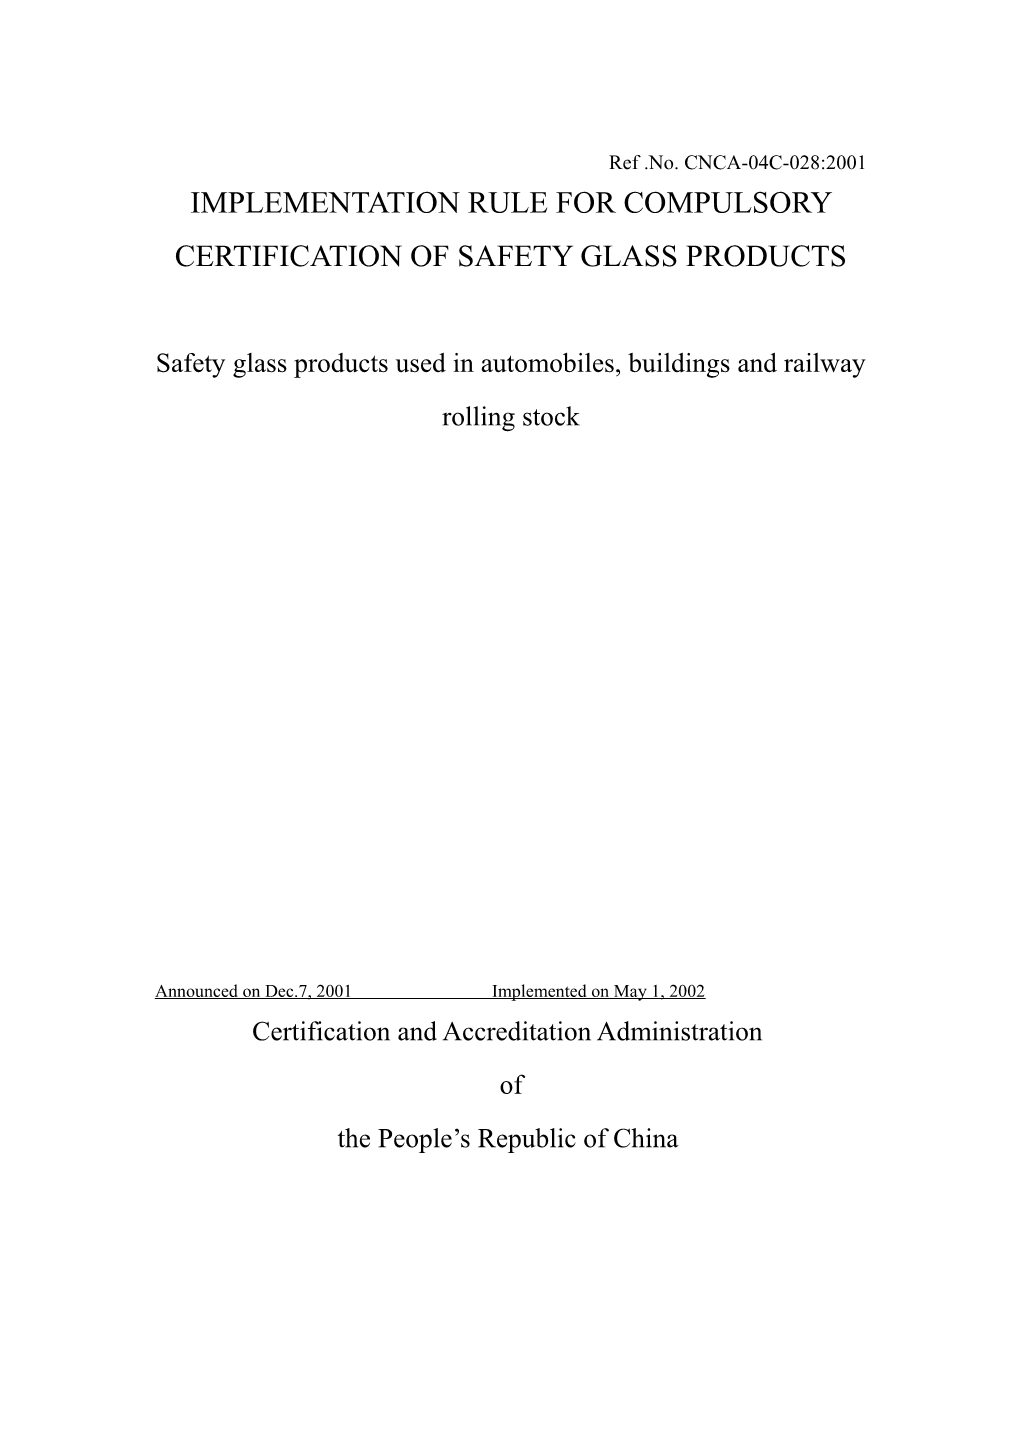 Implementation Rules for Compulsory Certification of Safety Glass Product